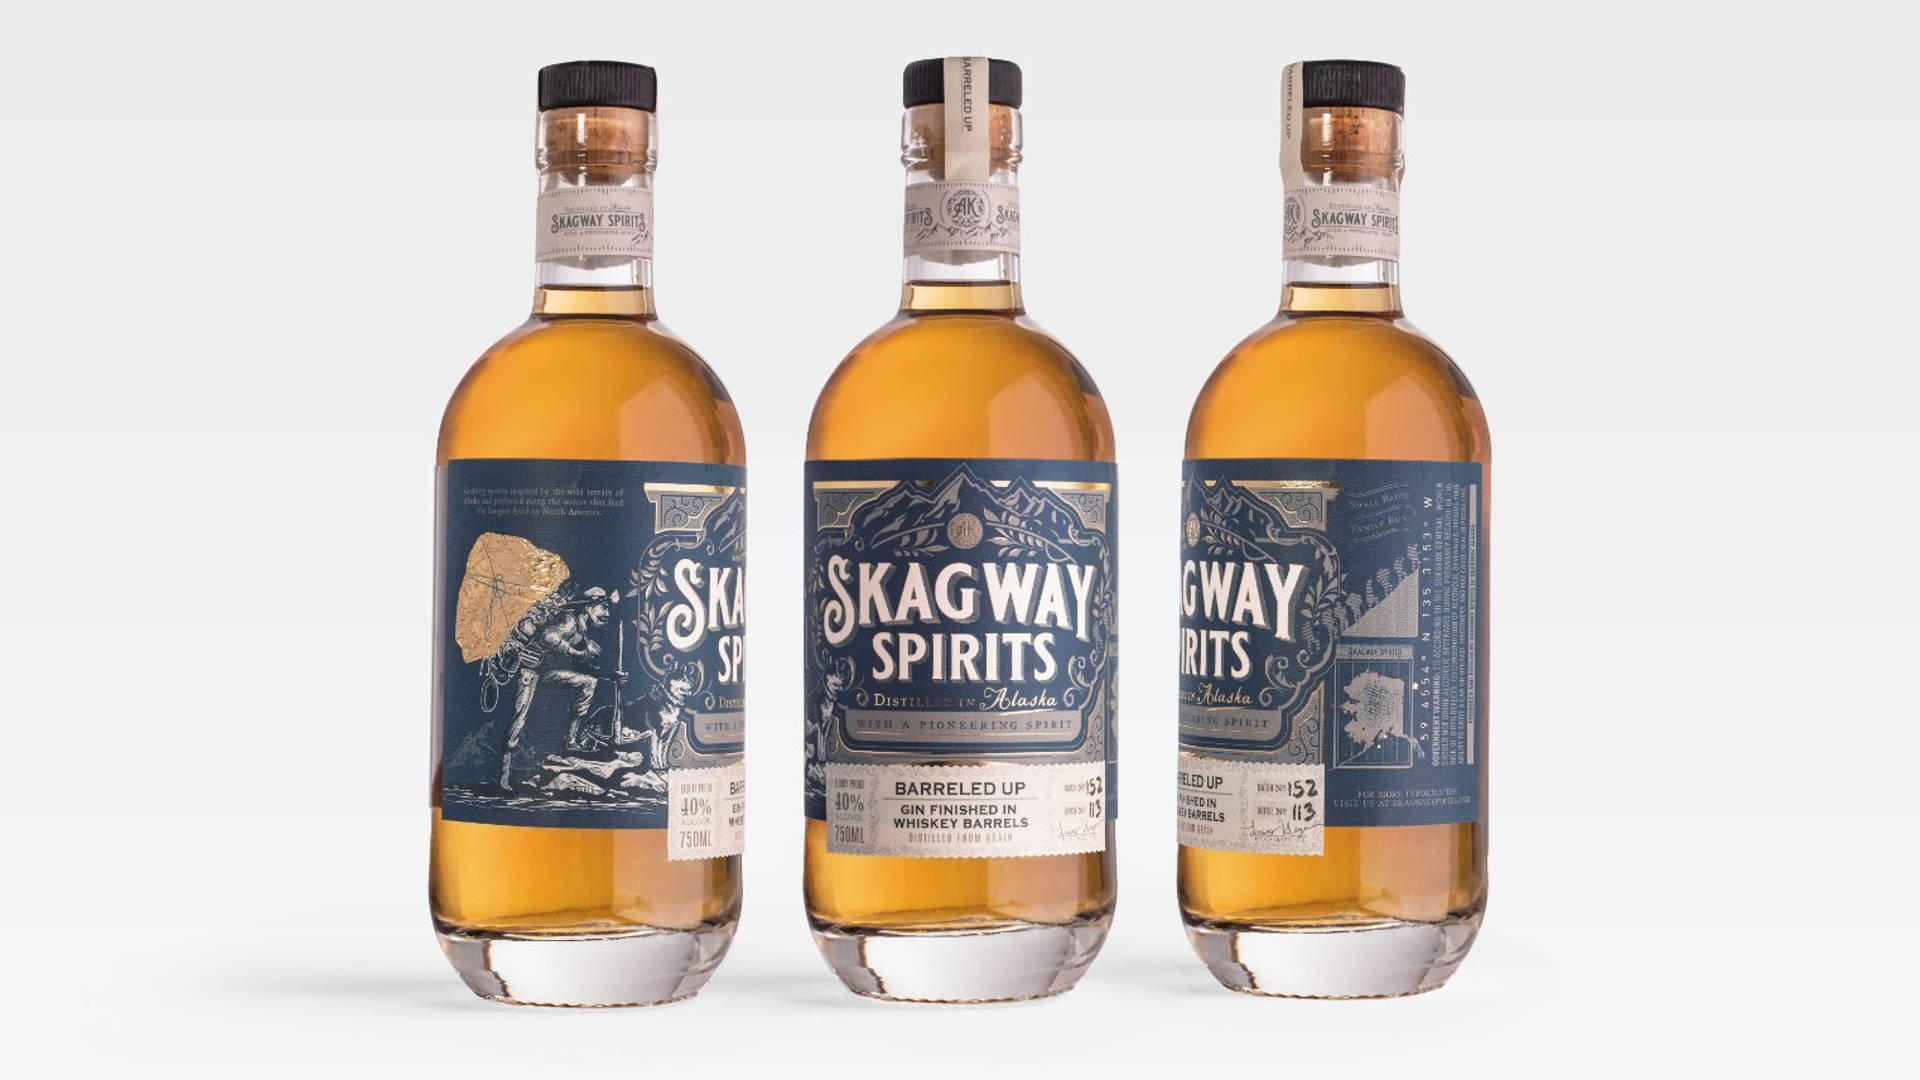 Featured image for Skagway Spirits Channels The Pioneer Spirit With an Wonderfully Illustrated Label